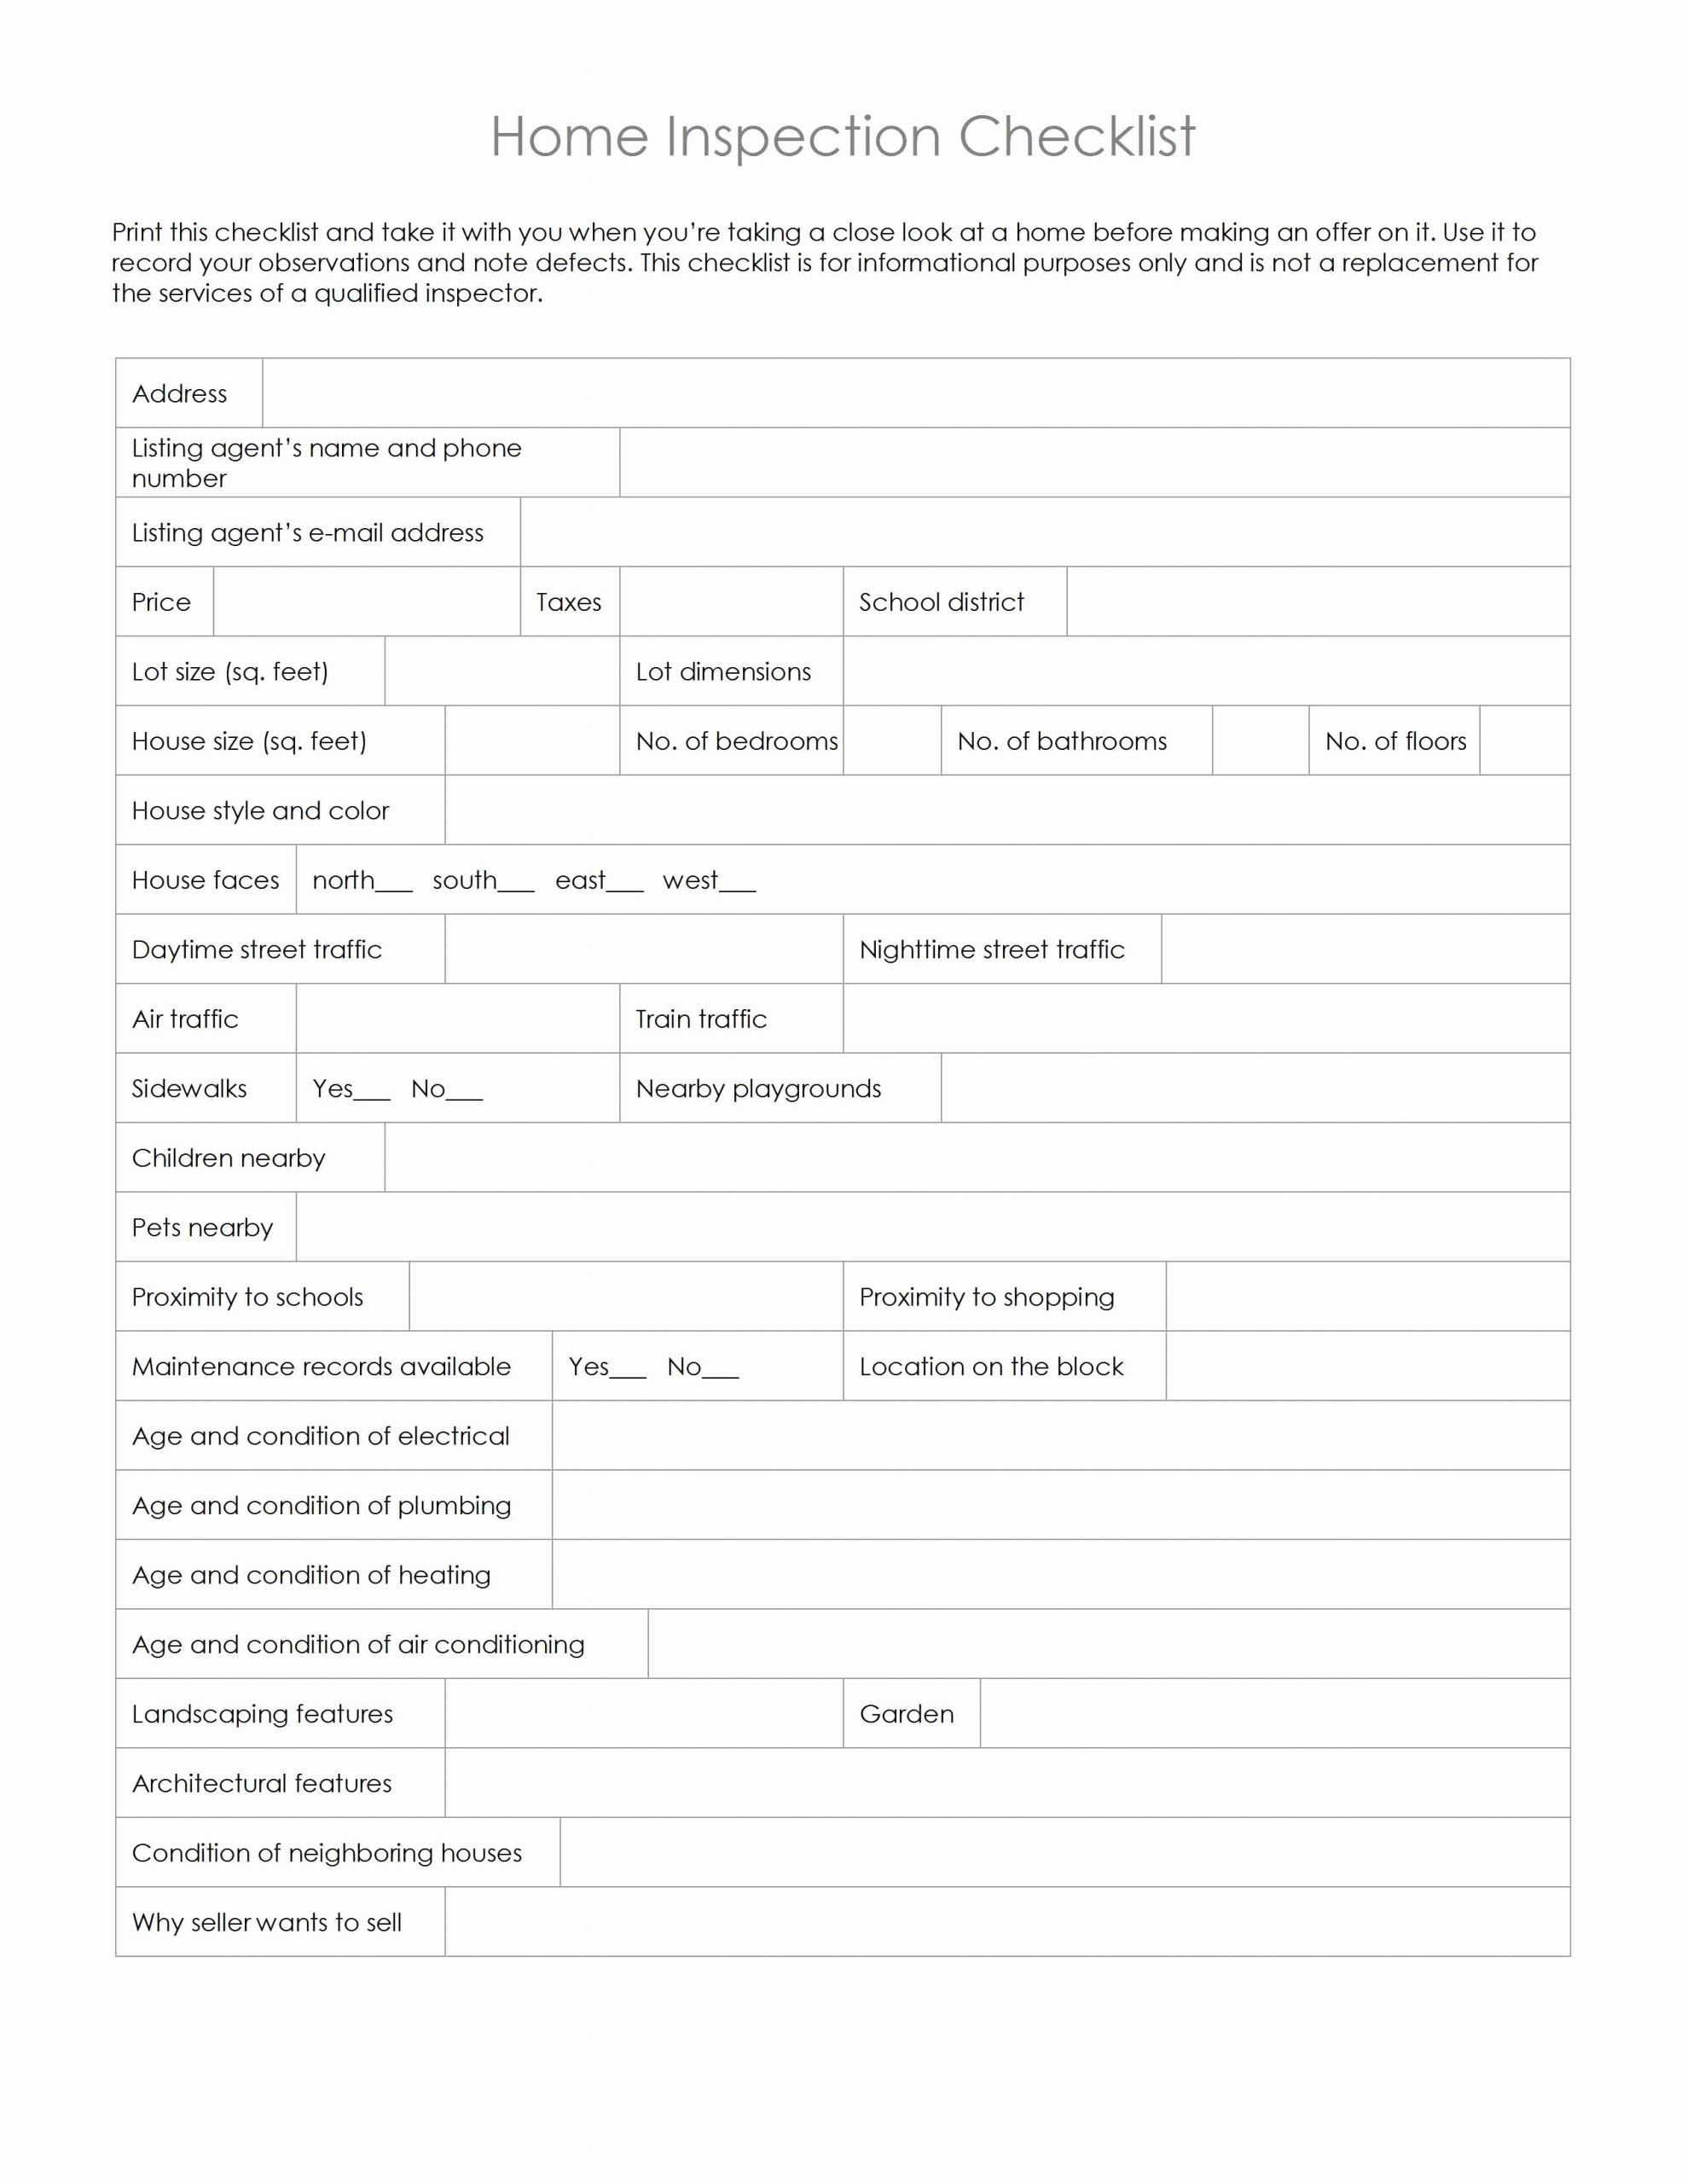 Home Inspection form Template Awesome Home Inspection Checklist Template